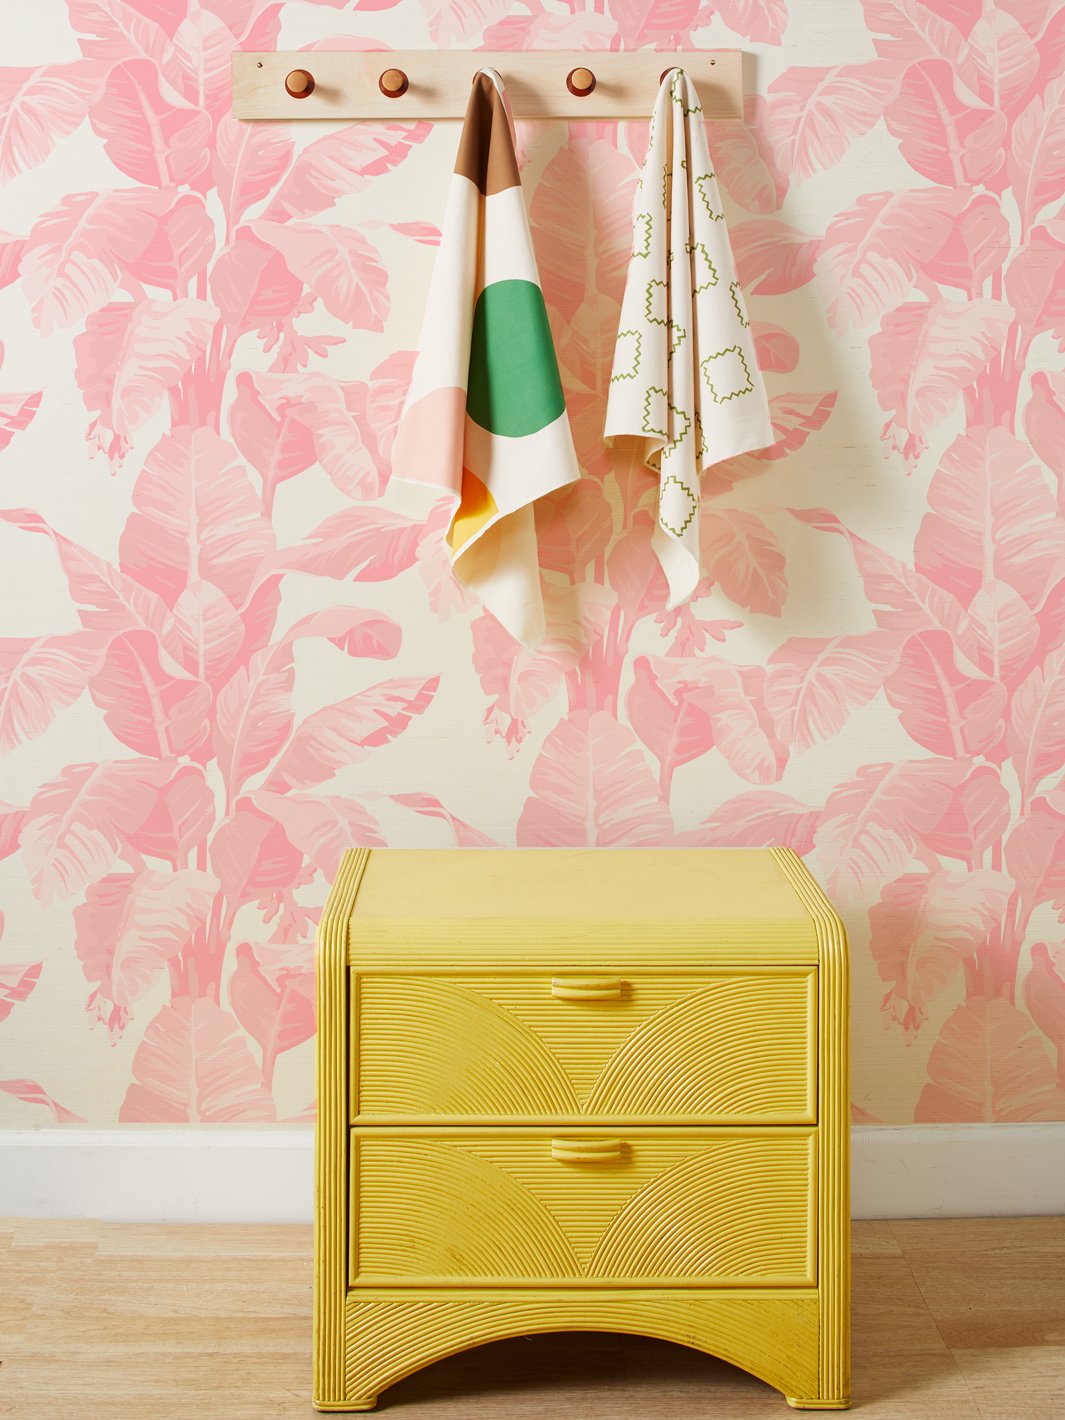 'Pacifico Palm' Grasscloth' Wallpaper by Nathan Turner - Garcelle Pink